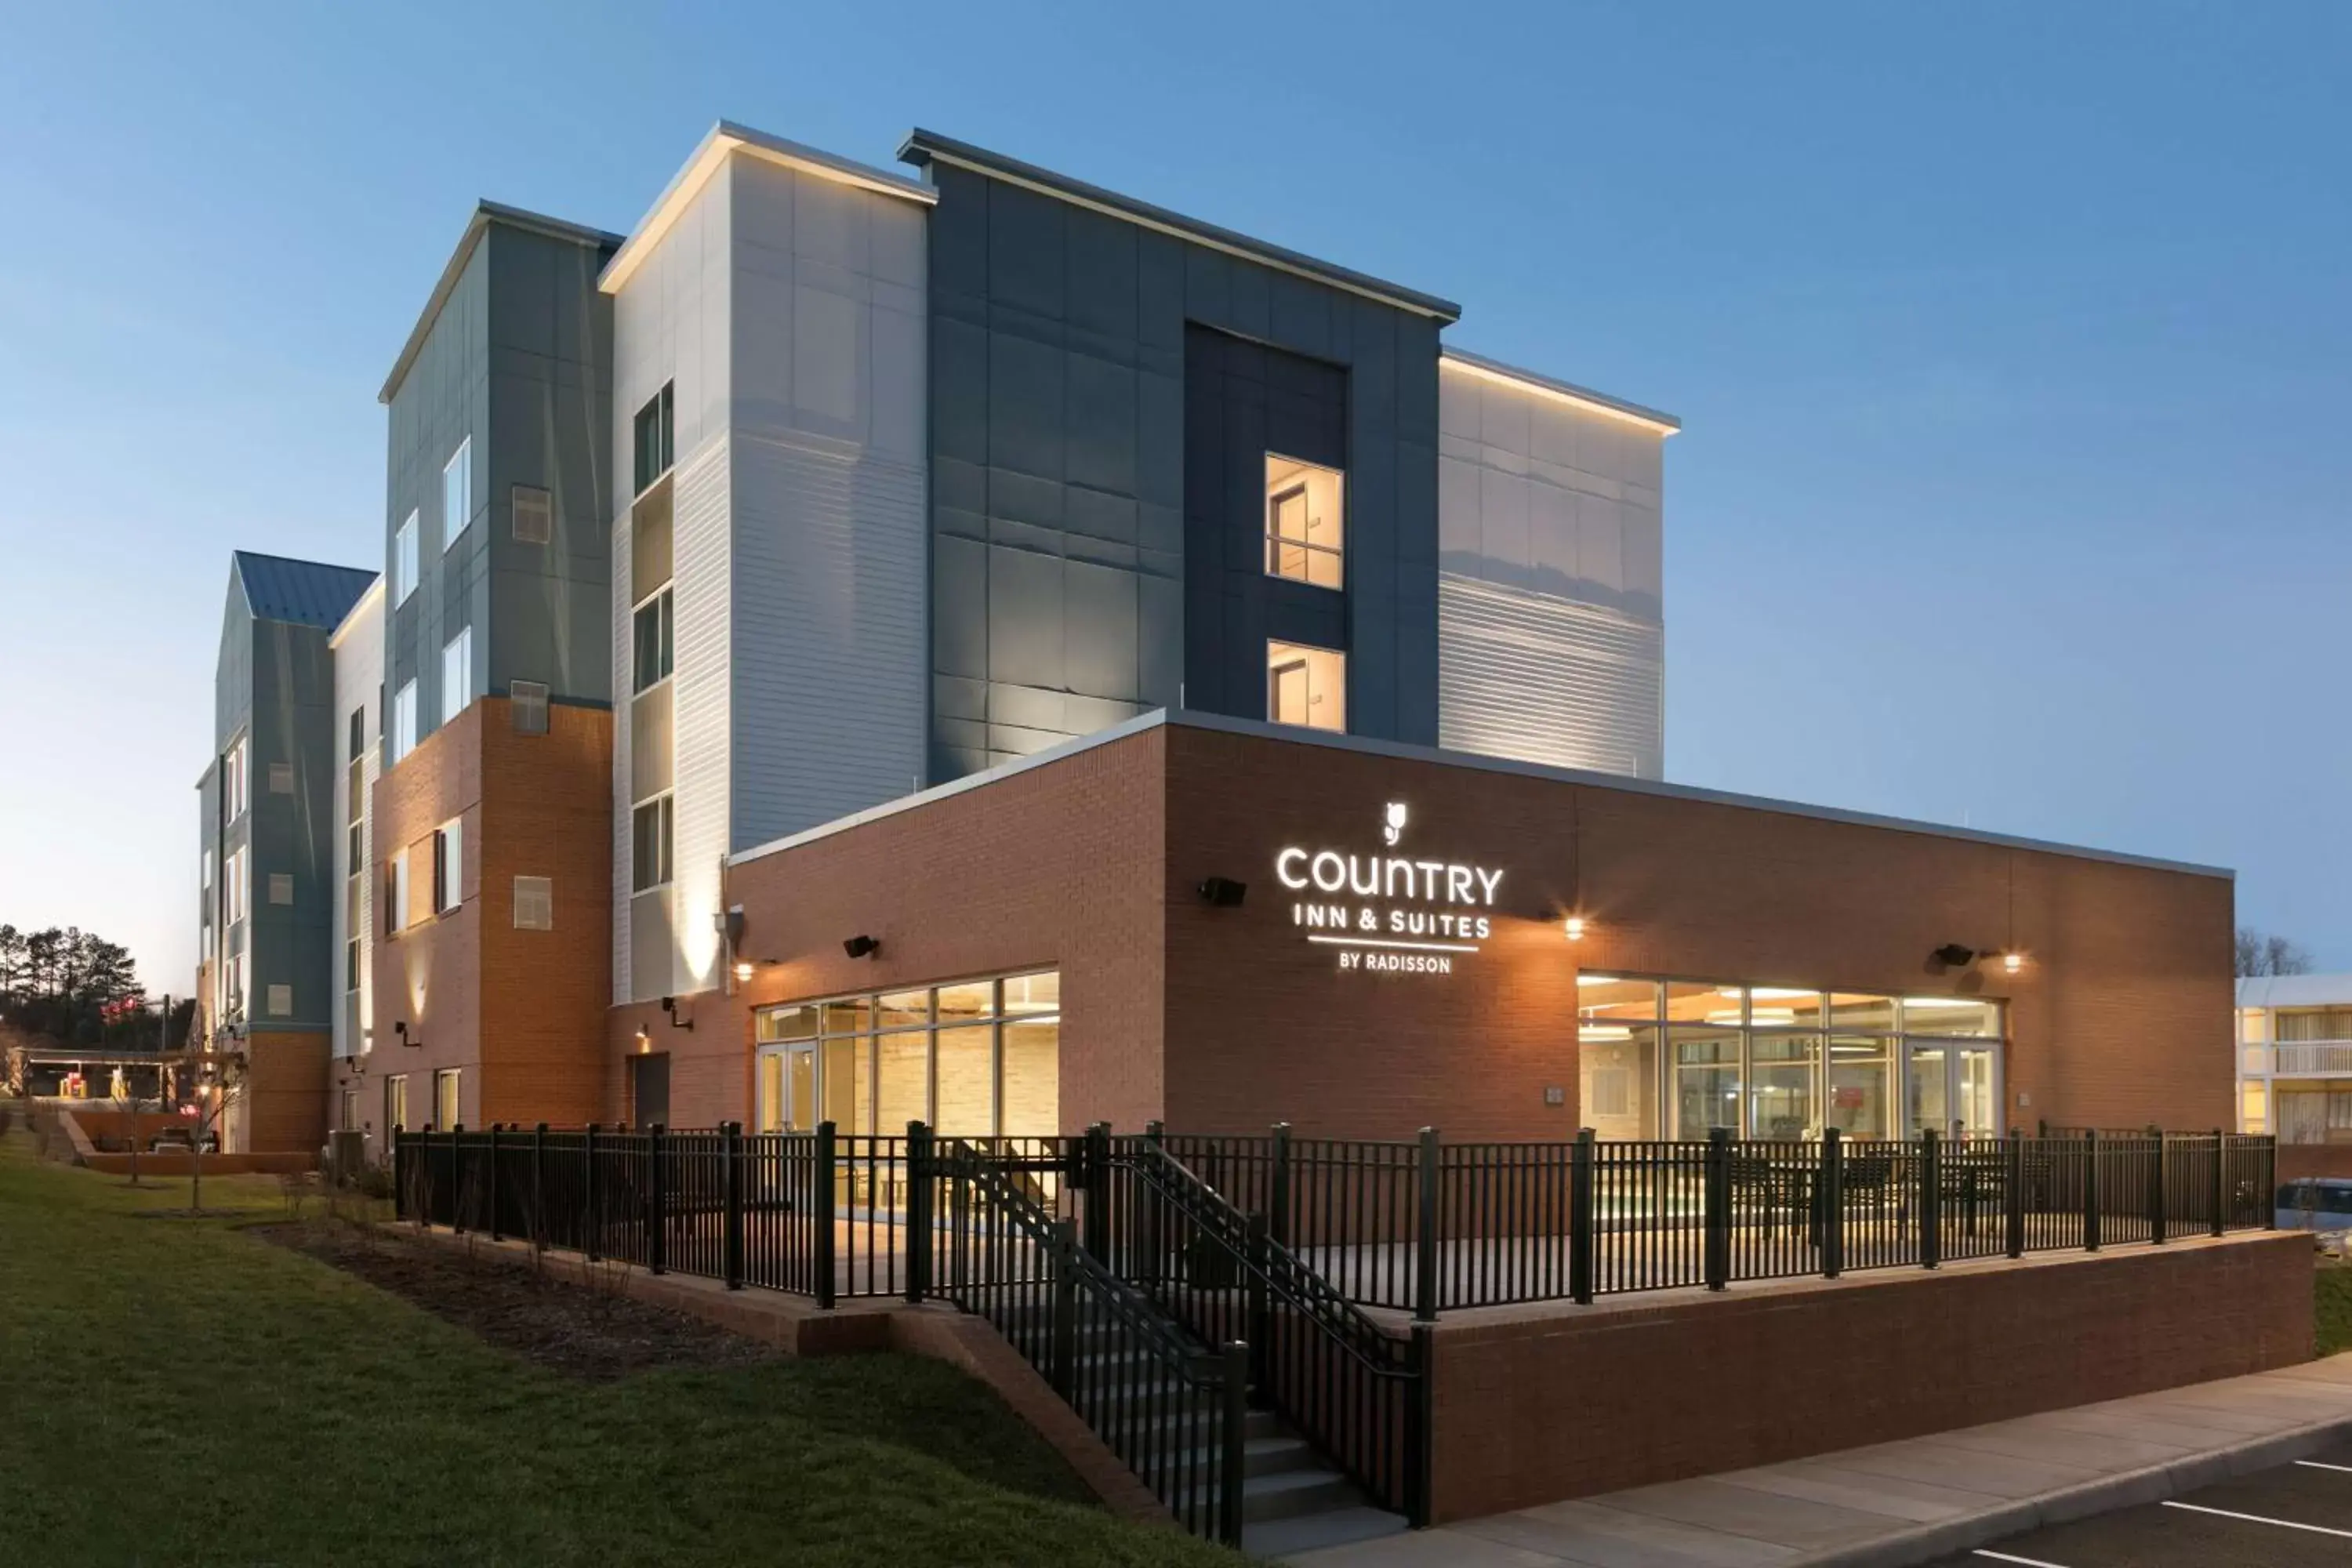 Property Building in Country Inn & Suites by Radisson, Charlottesville-UVA, VA